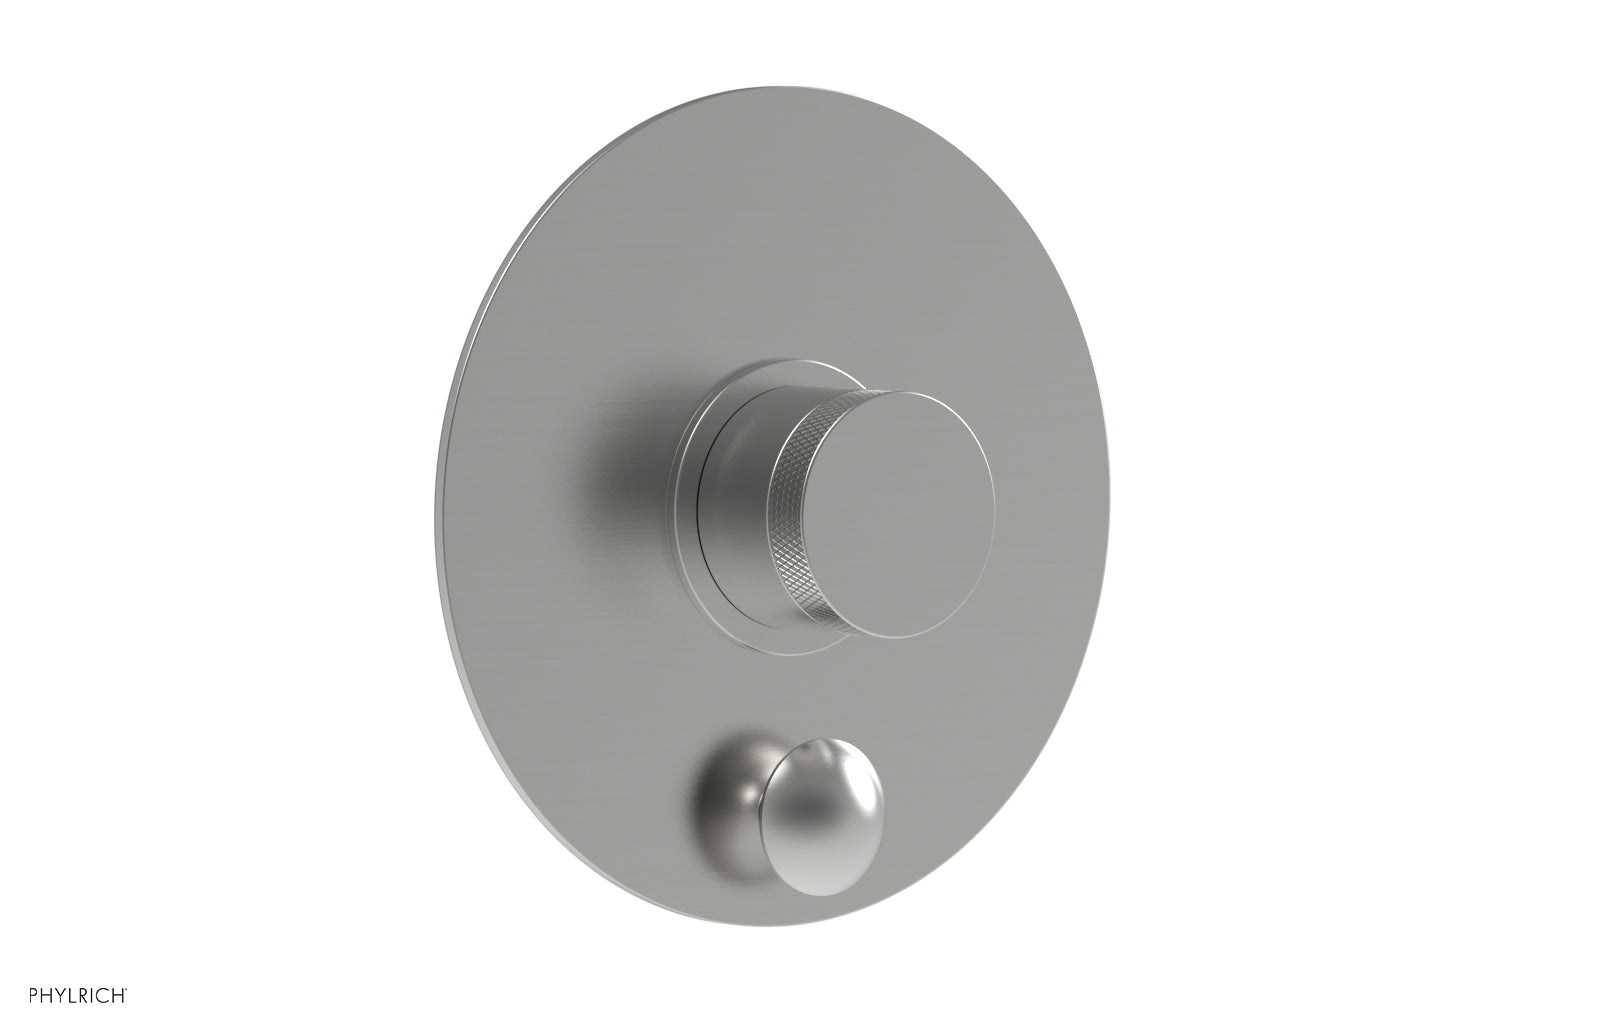 Phylrich BASIC II Pressure Balance Shower Plate with Diverter and Handle Trim Set